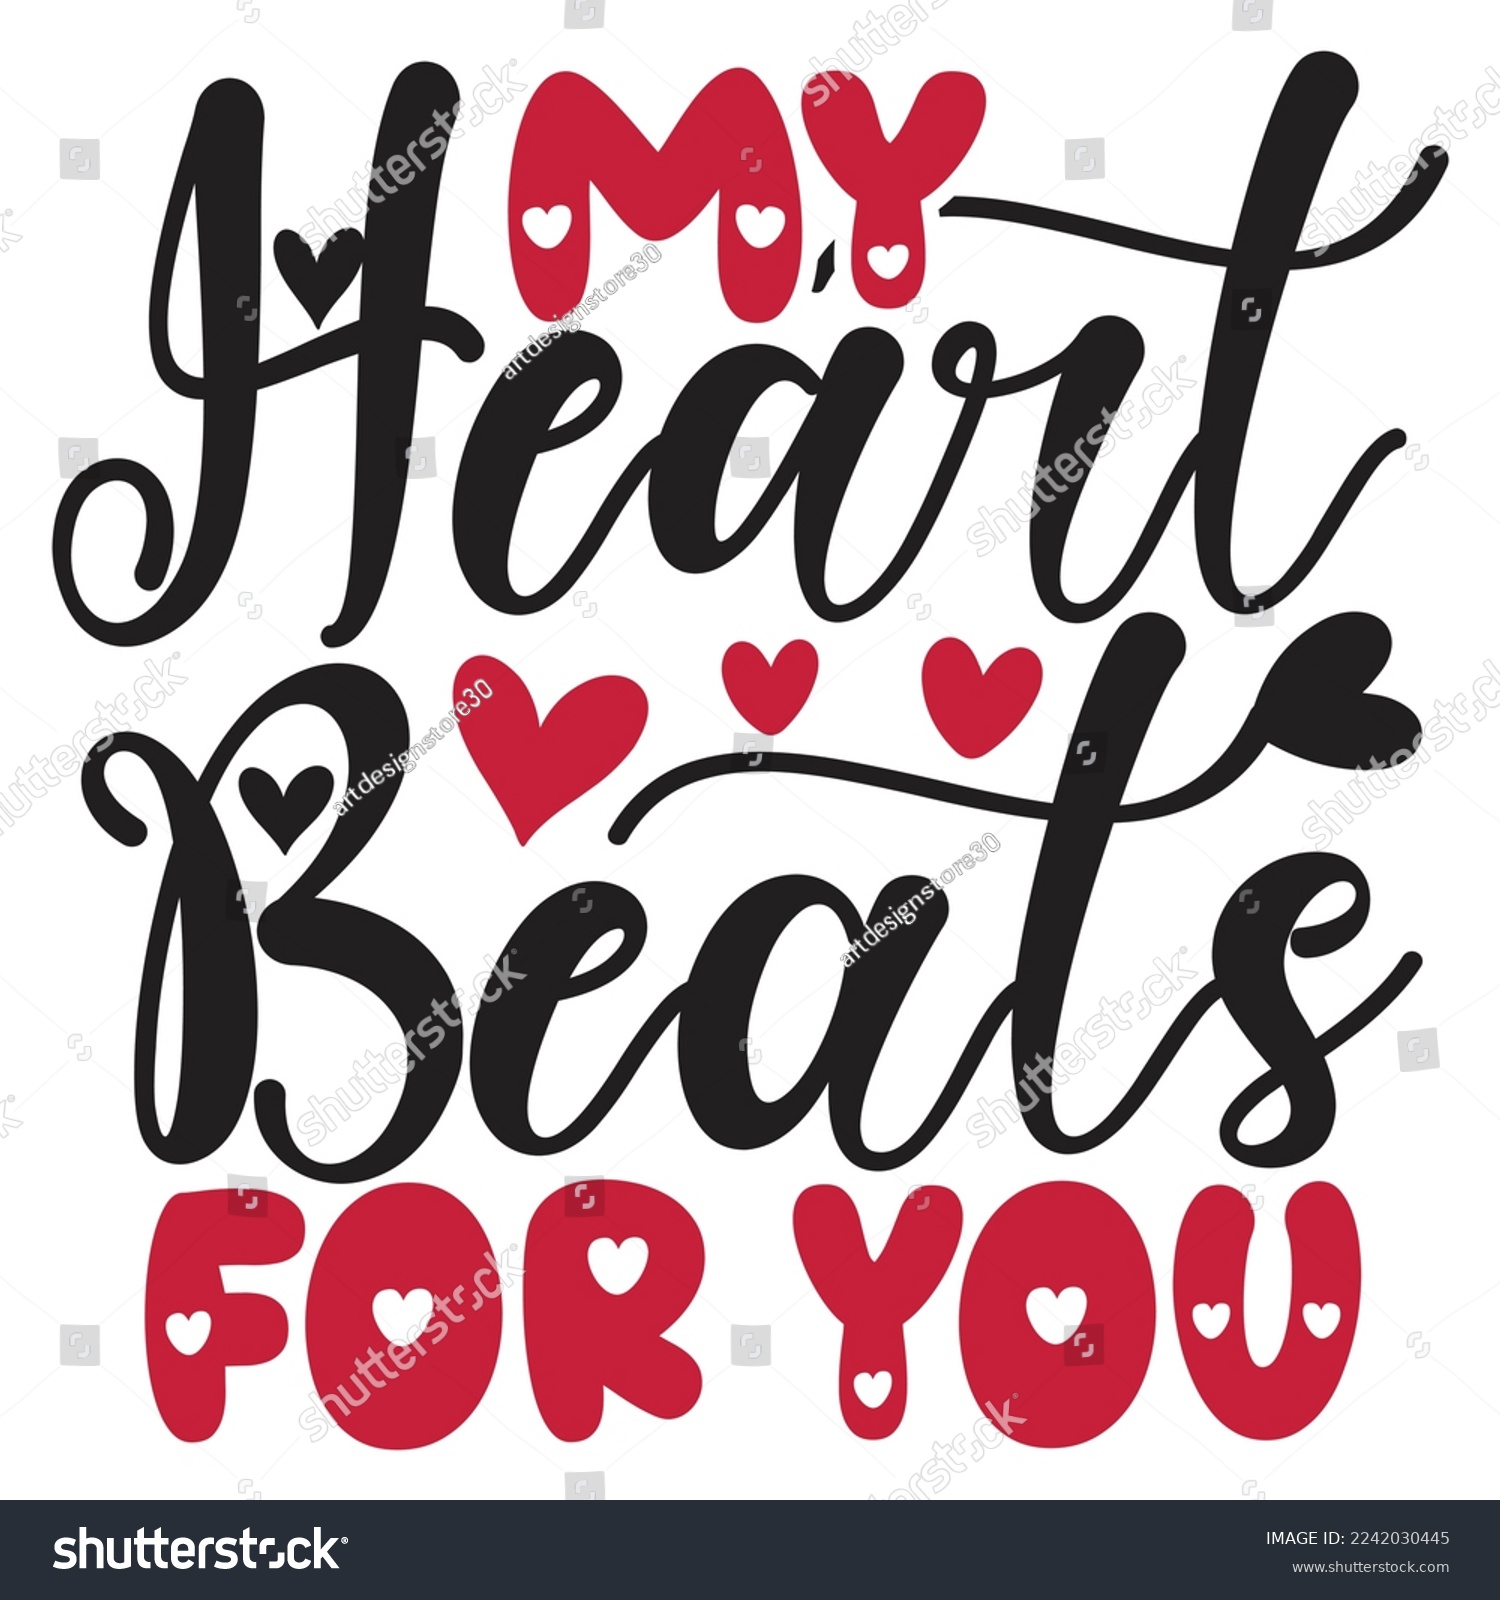 SVG of My Heart Beats For You - Happy Valentine's Day SVG And T-shirt Design, Love Hearts vector File. Happy Valentine's day vector card. Happy Valentines Day lettering on a white background. svg